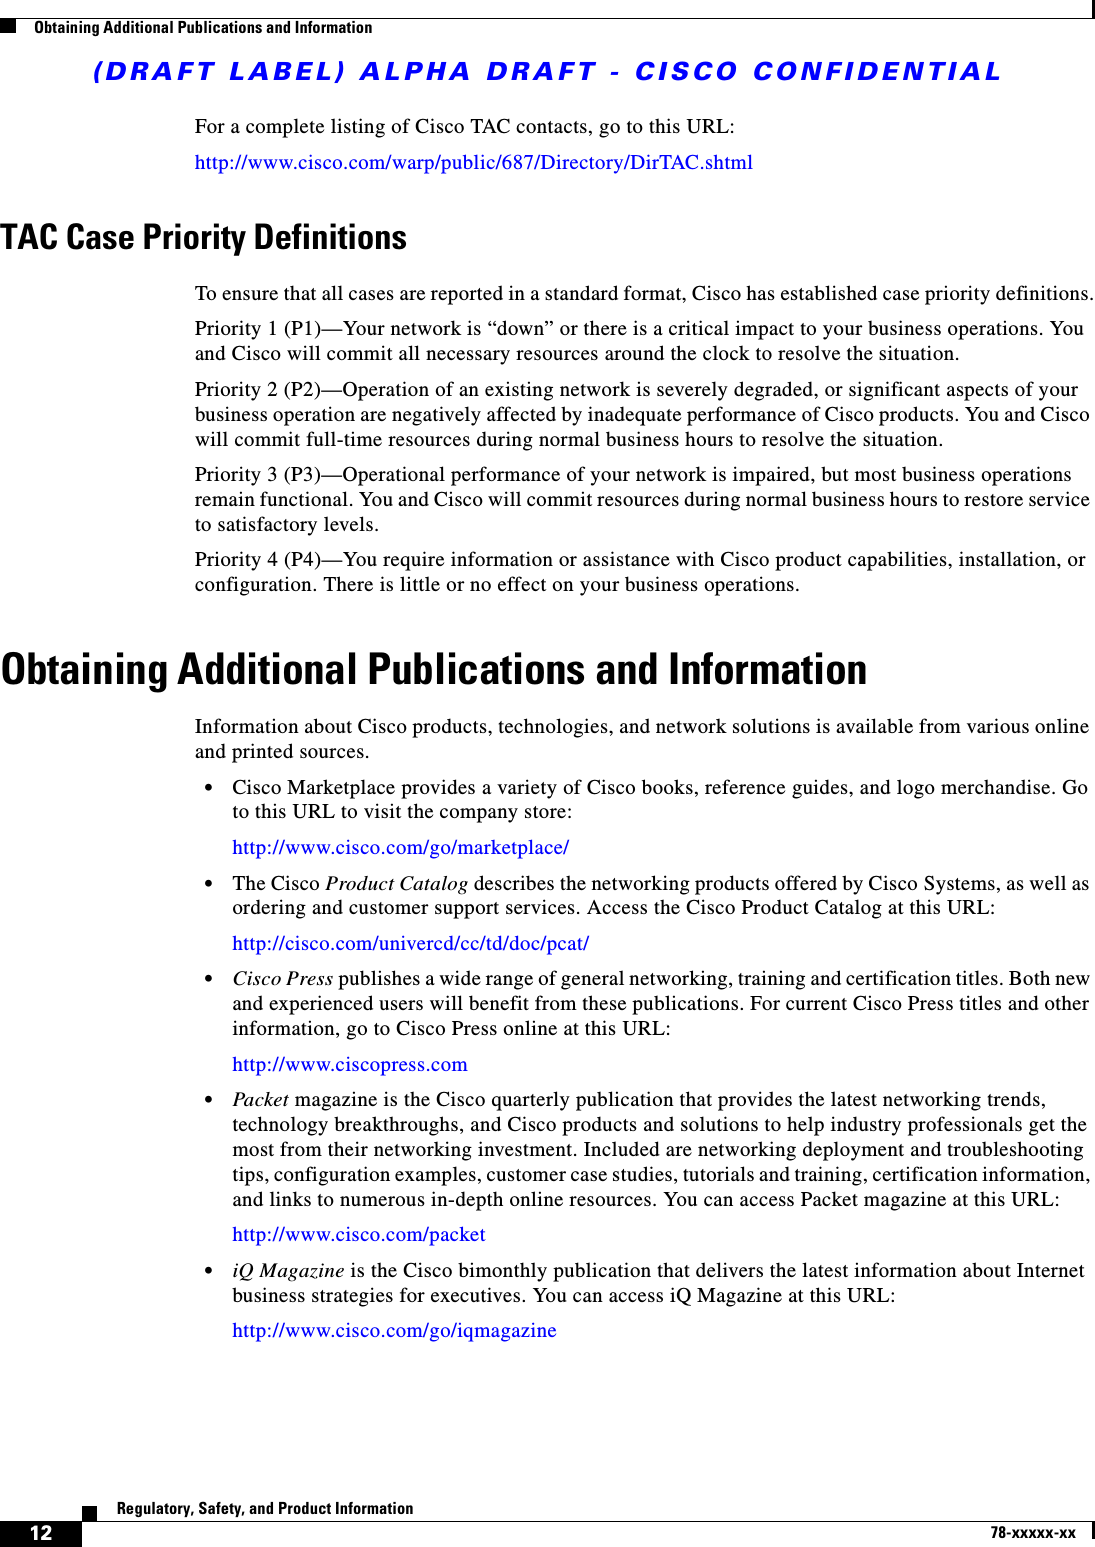 (DRAFT LABEL) ALPHA DRAFT - CISCO CONFIDENTIAL12Regulatory, Safety, and Product Information78-xxxxx-xxObtaining Additional Publications and InformationFor a complete listing of Cisco TAC contacts, go to this URL:http://www.cisco.com/warp/public/687/Directory/DirTAC.shtmlTAC Case Priority DefinitionsTo ensure that all cases are reported in a standard format, Cisco has established case priority definitions.Priority 1 (P1)—Your network is “down” or there is a critical impact to your business operations. You and Cisco will commit all necessary resources around the clock to resolve the situation. Priority 2 (P2)—Operation of an existing network is severely degraded, or significant aspects of your business operation are negatively affected by inadequate performance of Cisco products. You and Cisco will commit full-time resources during normal business hours to resolve the situation.Priority 3 (P3)—Operational performance of your network is impaired, but most business operations remain functional. You and Cisco will commit resources during normal business hours to restore service to satisfactory levels.Priority 4 (P4)—You require information or assistance with Cisco product capabilities, installation, or configuration. There is little or no effect on your business operations.Obtaining Additional Publications and InformationInformation about Cisco products, technologies, and network solutions is available from various online and printed sources.•Cisco Marketplace provides a variety of Cisco books, reference guides, and logo merchandise. Go to this URL to visit the company store:http://www.cisco.com/go/marketplace/•The Cisco Product Catalog describes the networking products offered by Cisco Systems, as well as ordering and customer support services. Access the Cisco Product Catalog at this URL:http://cisco.com/univercd/cc/td/doc/pcat/•Cisco Press publishes a wide range of general networking, training and certification titles. Both new and experienced users will benefit from these publications. For current Cisco Press titles and other information, go to Cisco Press online at this URL:http://www.ciscopress.com•Packet magazine is the Cisco quarterly publication that provides the latest networking trends, technology breakthroughs, and Cisco products and solutions to help industry professionals get the most from their networking investment. Included are networking deployment and troubleshooting tips, configuration examples, customer case studies, tutorials and training, certification information, and links to numerous in-depth online resources. You can access Packet magazine at this URL:http://www.cisco.com/packet•iQ Magazine is the Cisco bimonthly publication that delivers the latest information about Internet business strategies for executives. You can access iQ Magazine at this URL:http://www.cisco.com/go/iqmagazine